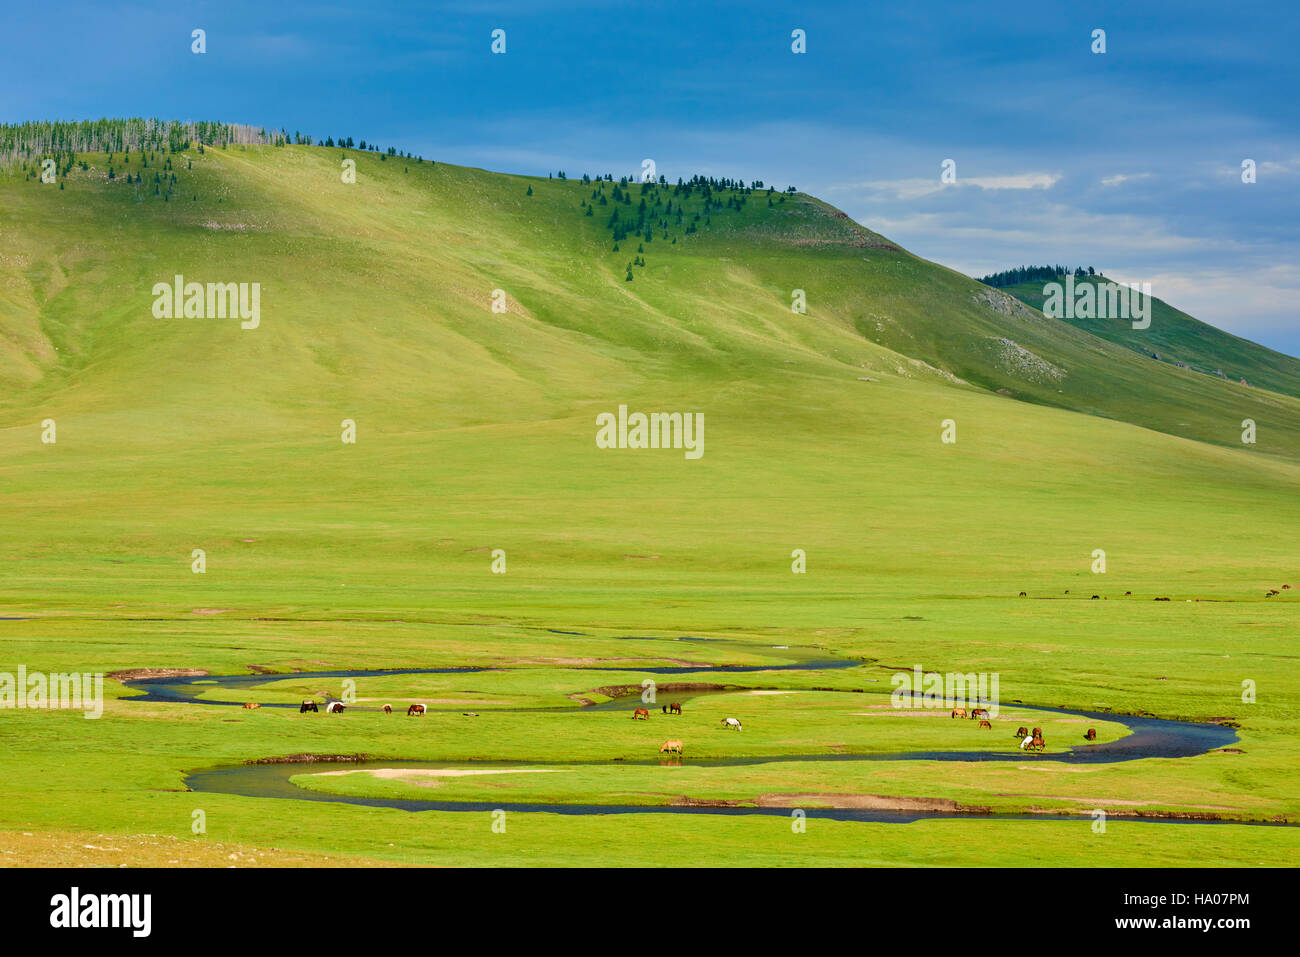 Mongolia, Arkhangai province, herd in the steppe Stock Photo - Alamy